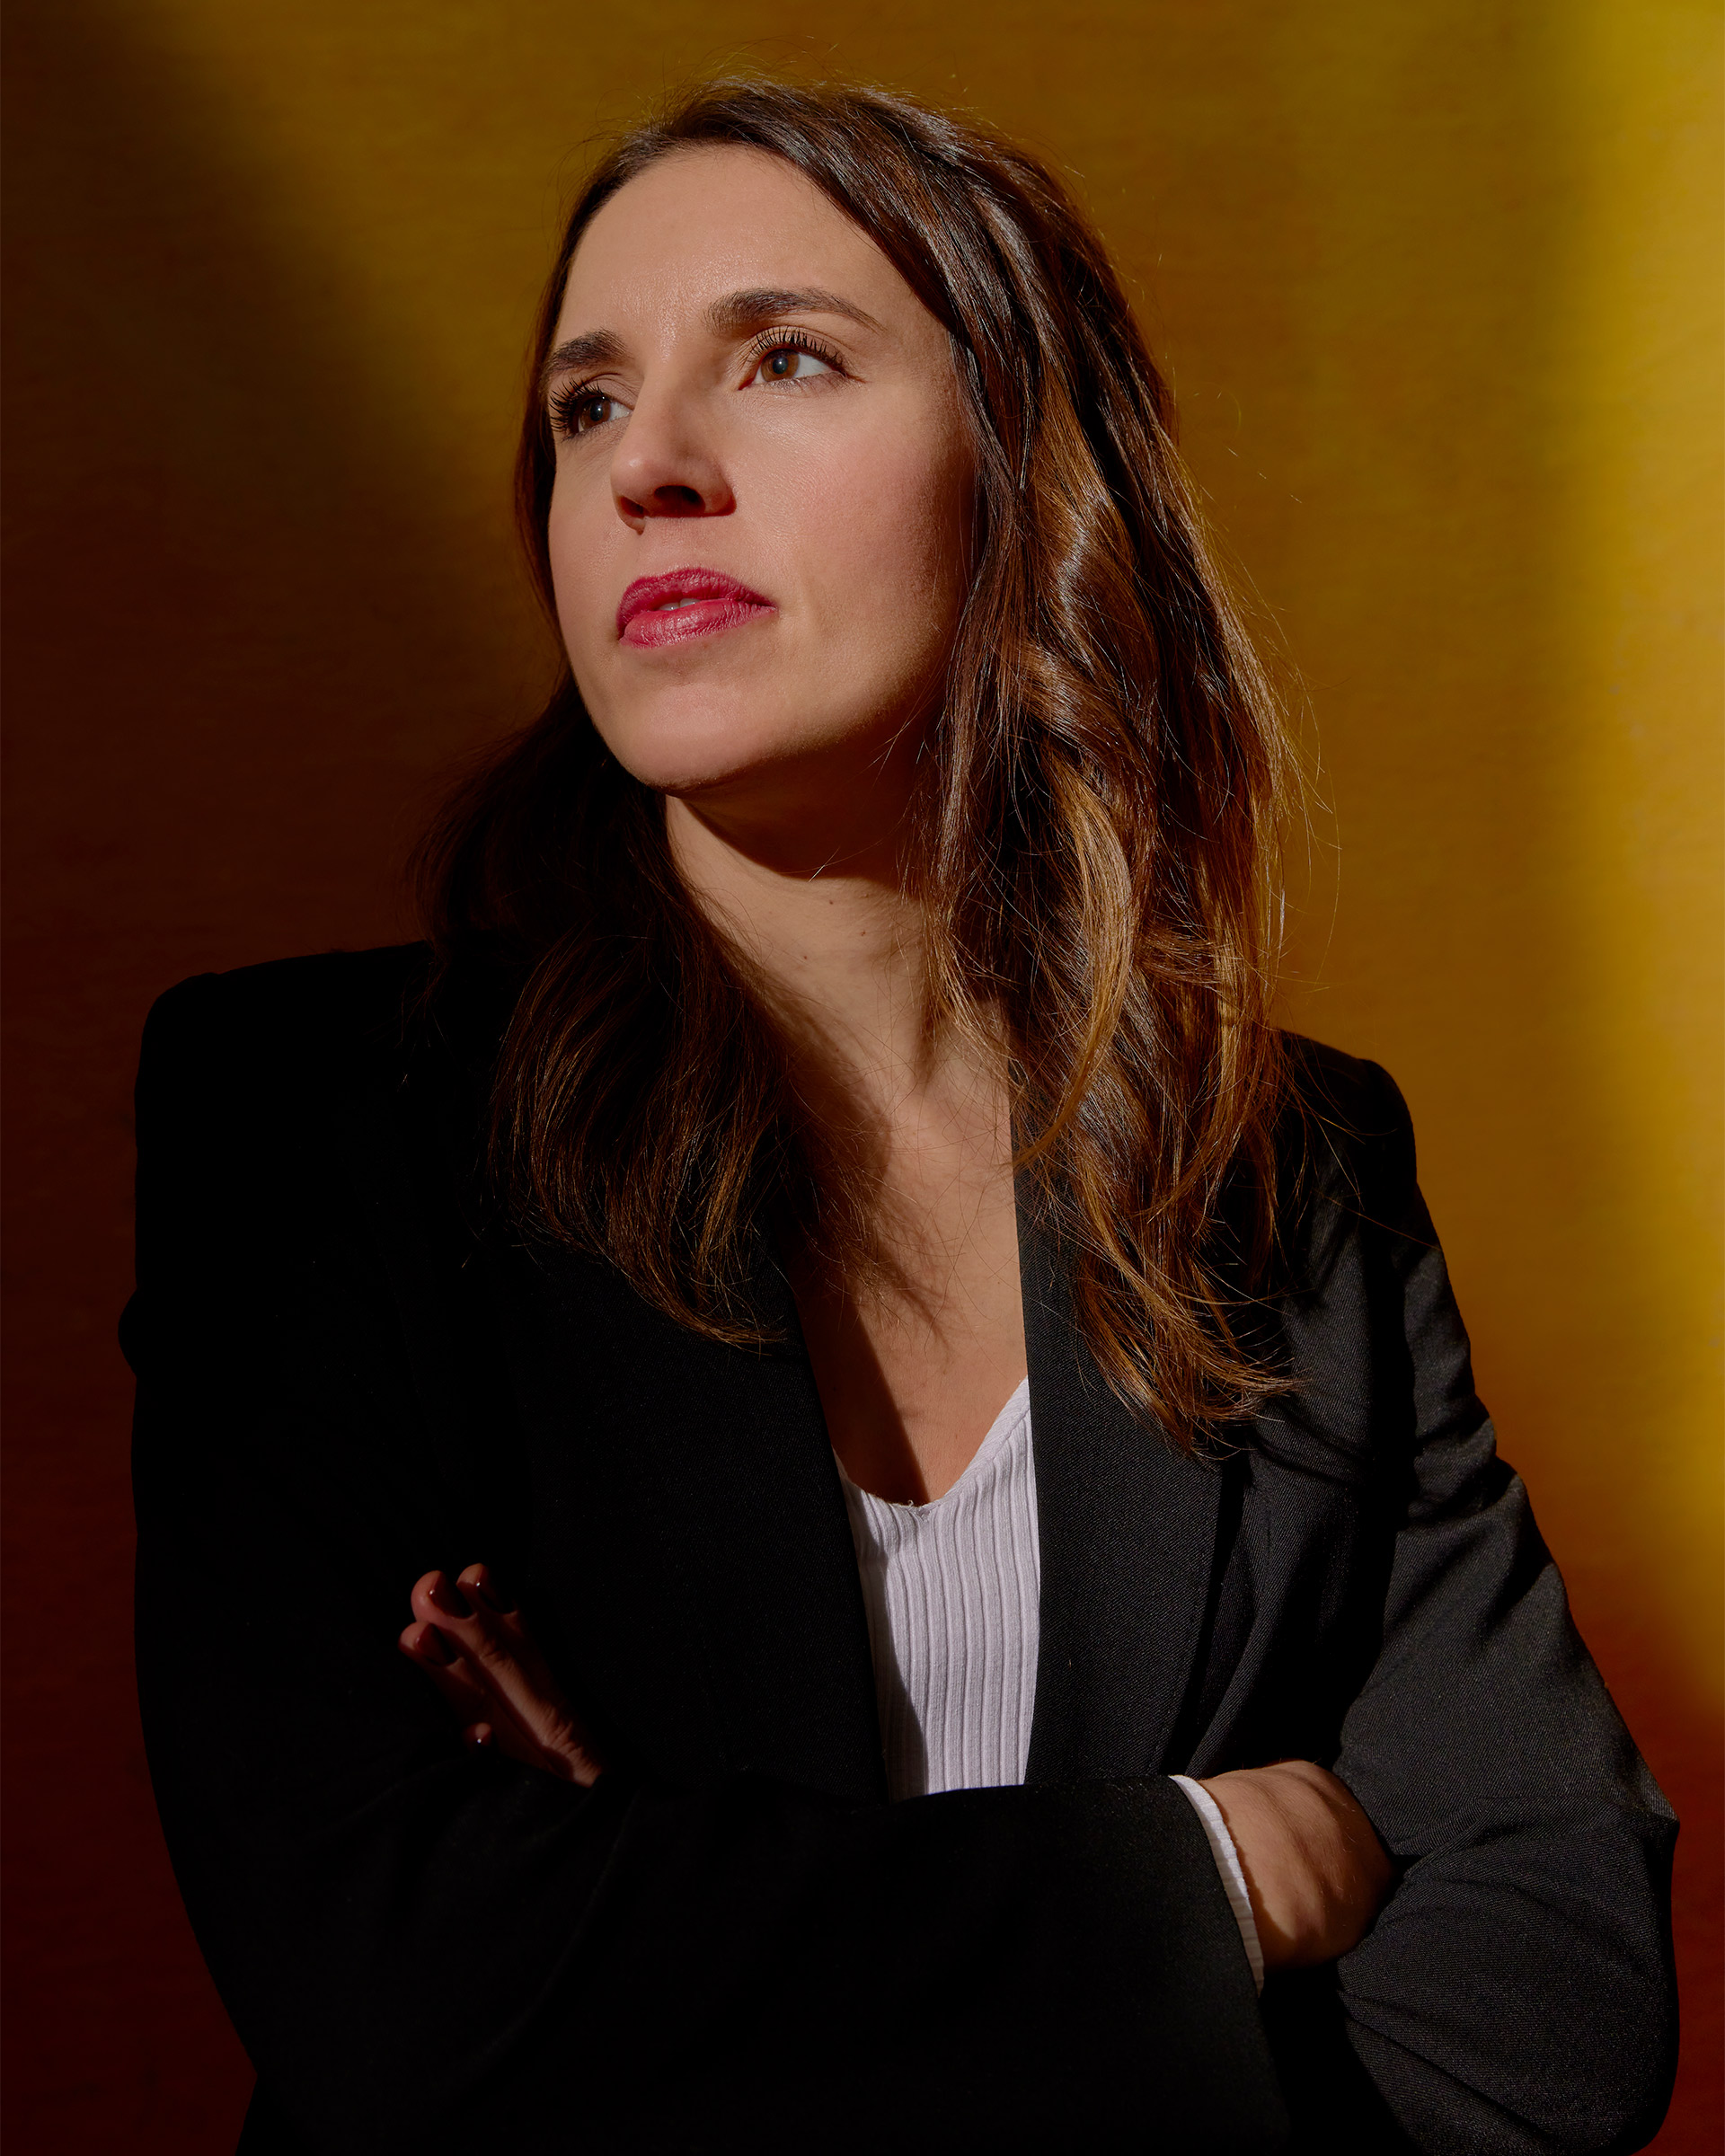 Irene Montero poses for a portrait in Madrid on Jan. 25. (Marina Coenen for TIME)